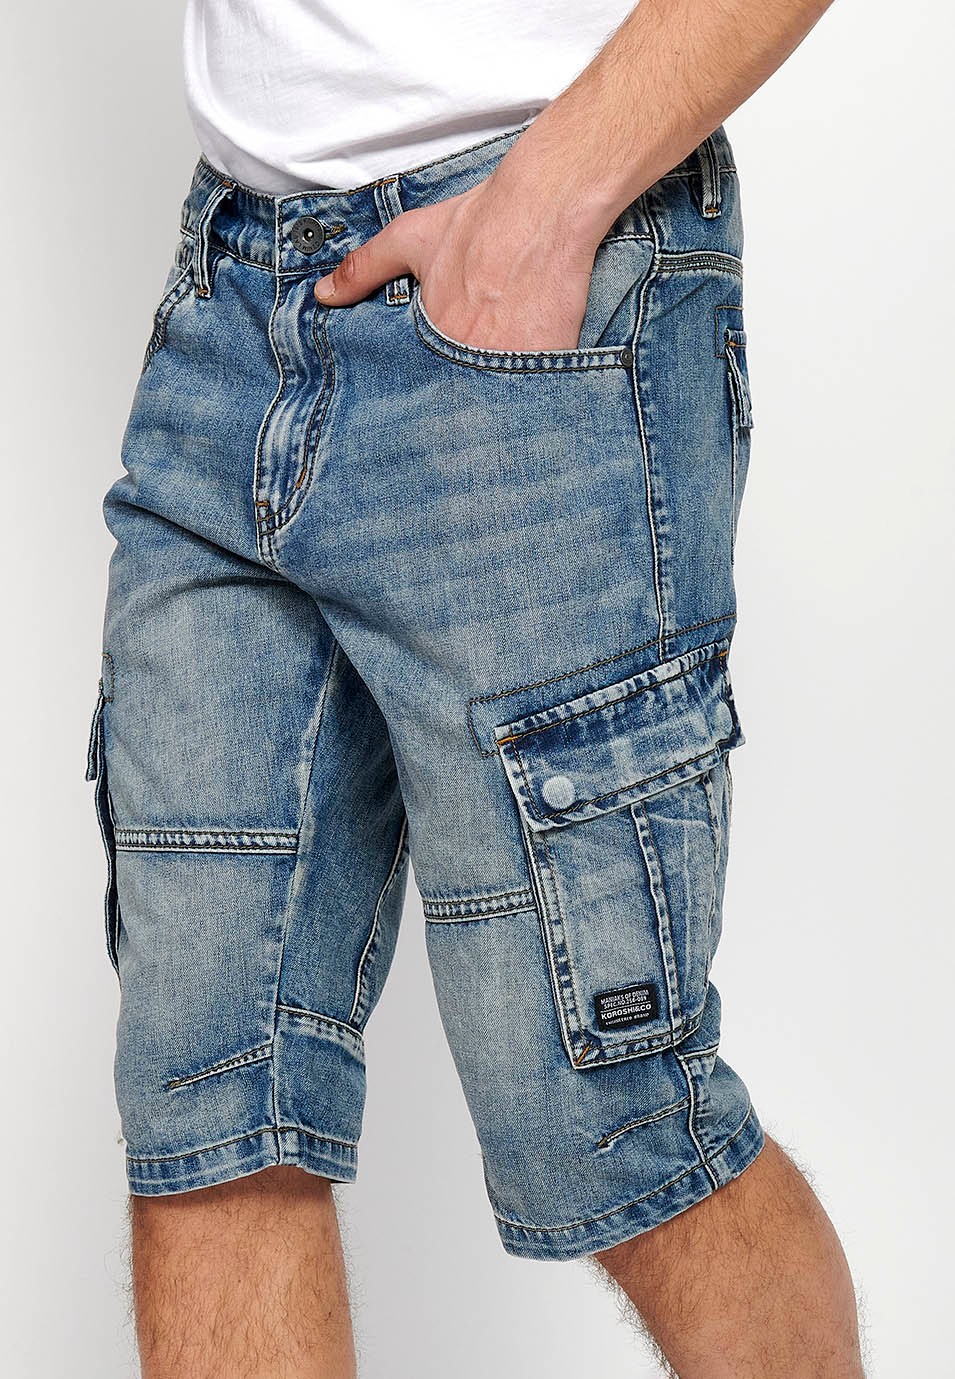 Denim Bermuda cargo shorts with front zipper and button closure with five pockets, one ticket pocket and two light blue sides, for Men 2